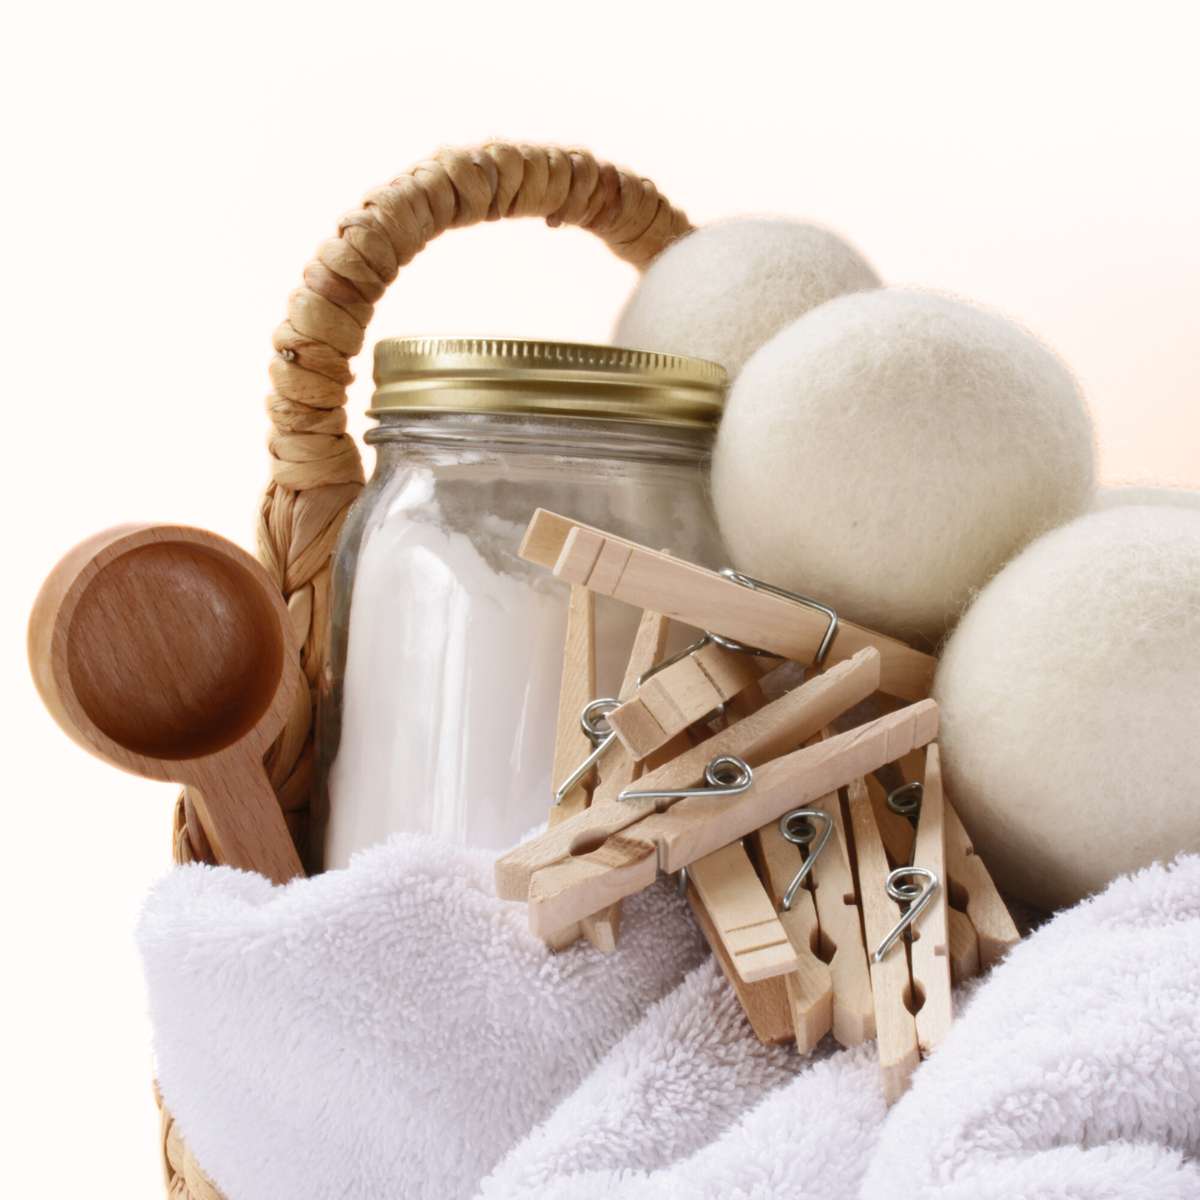 A wicker basket full of clothespins, wool dryer balls and homemade laundry detergent with essential oils.